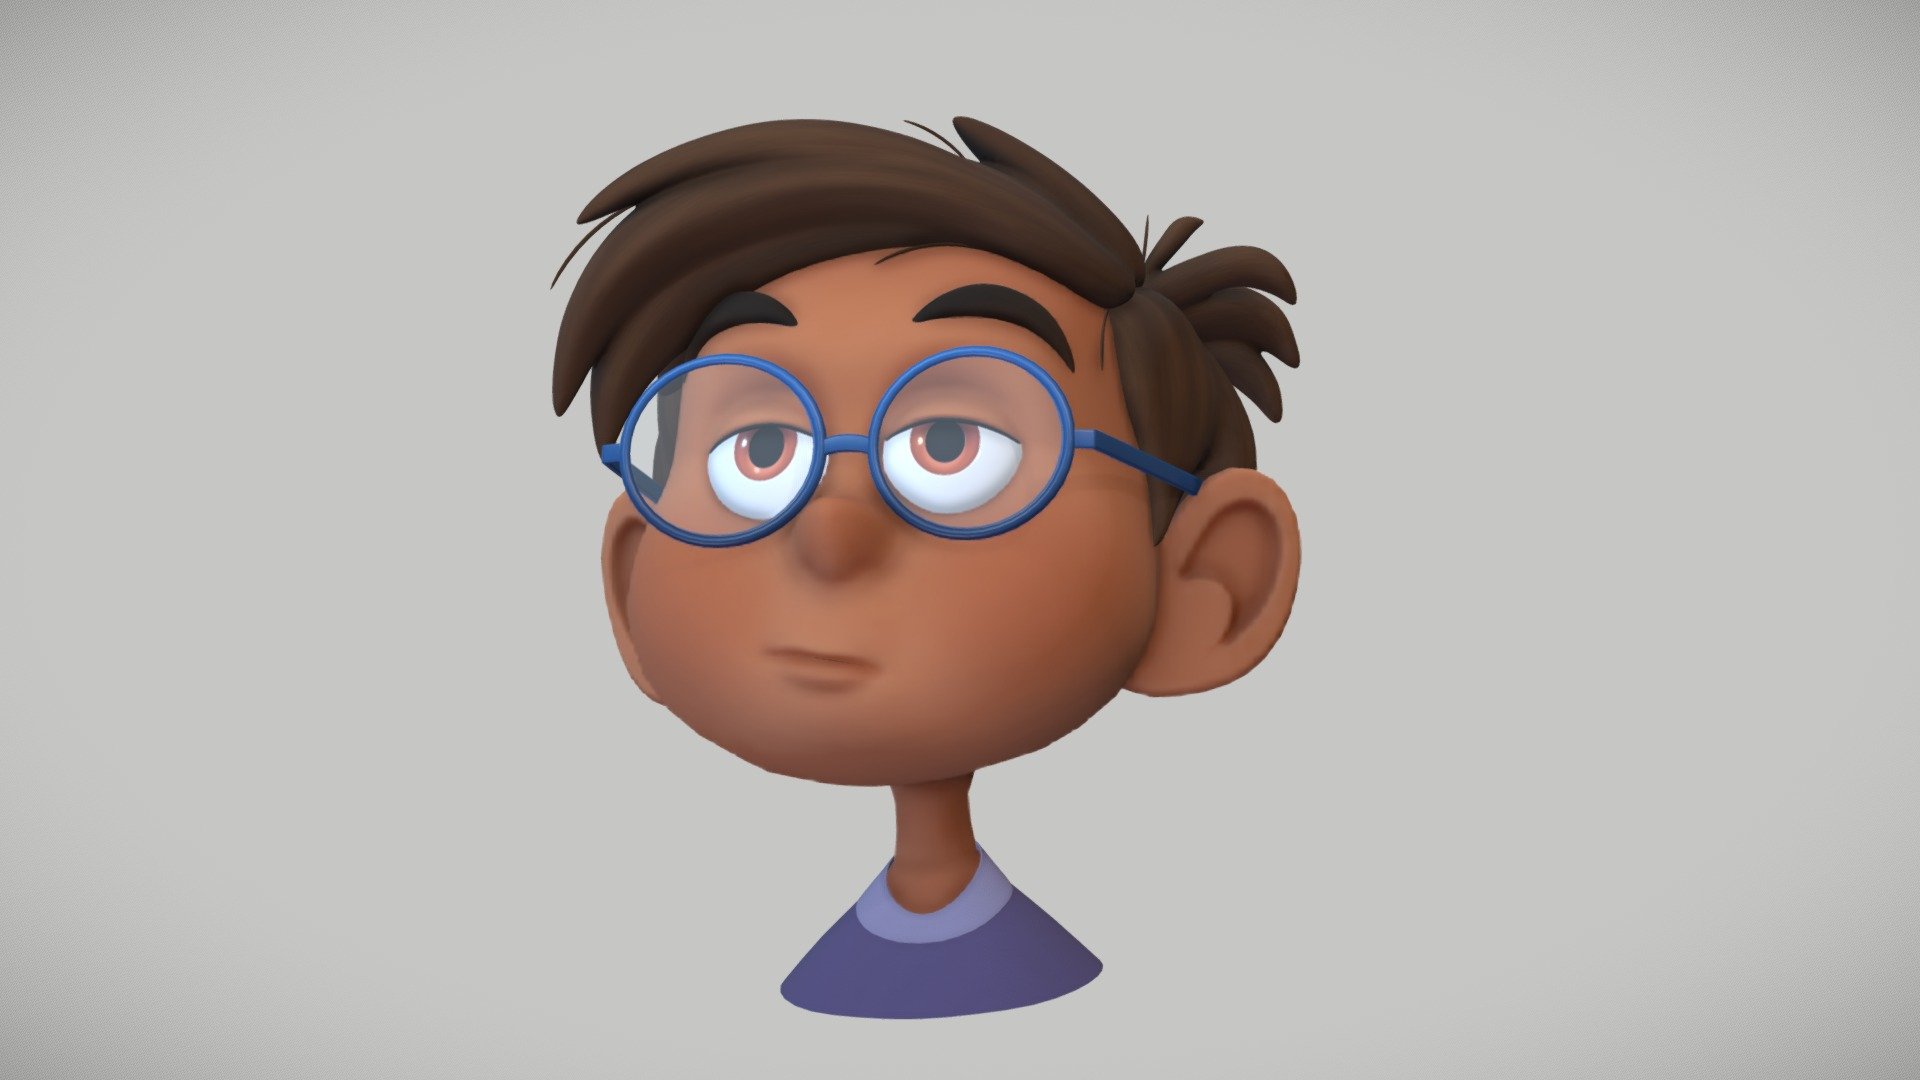 3D stylized face of a child based on a concept art by Luigi Lucarelli.

https://www.artstation.com/artwork/g0q3Zx - Indifferent Boy stylized - Buy Royalty Free 3D model by efrenfreeze 3d model